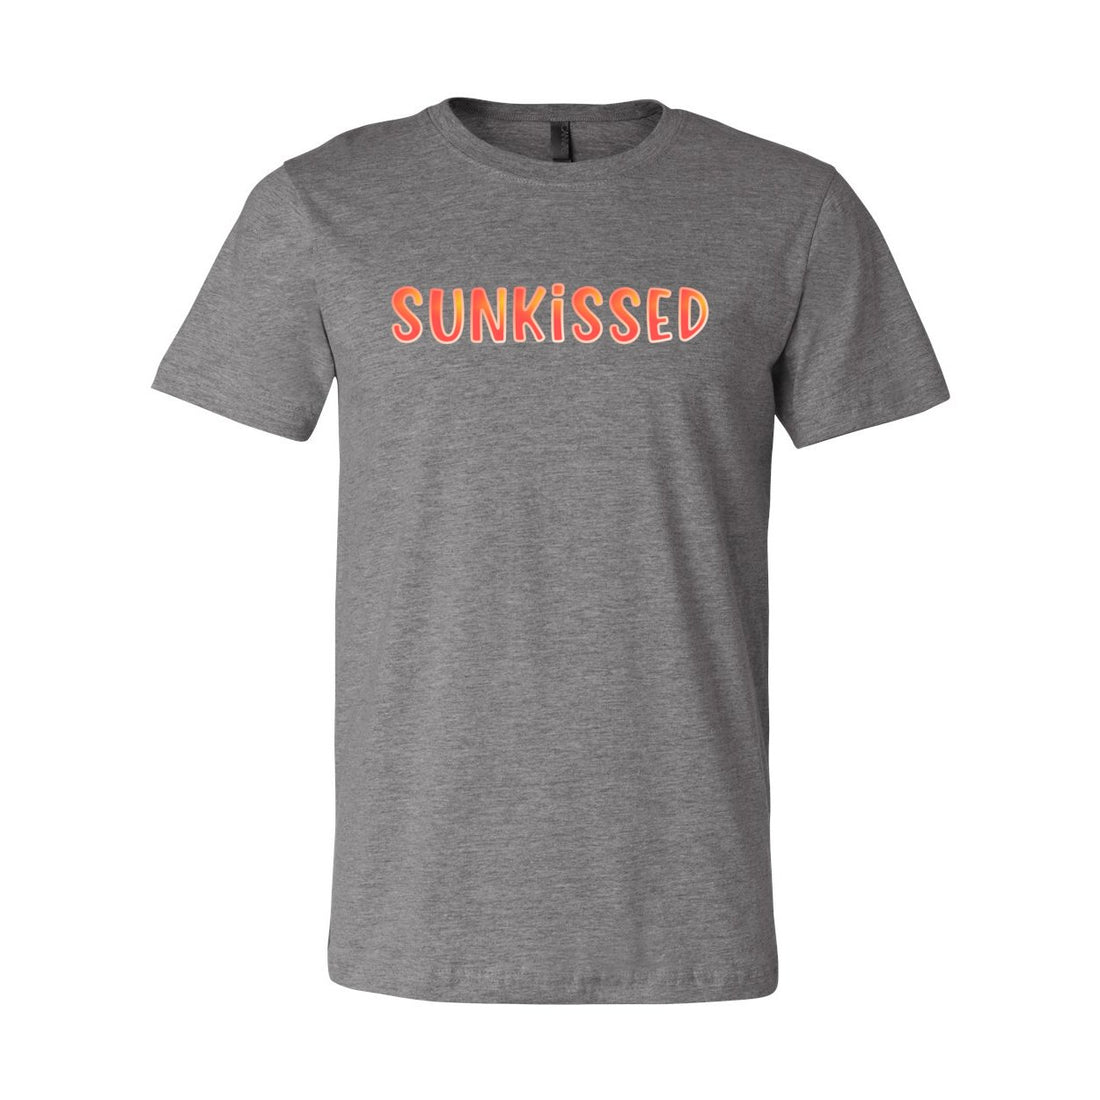 Sunkissed Short Sleeve Jersey Tee - T-Shirts - Positively Sassy - Sunkissed Short Sleeve Jersey Tee